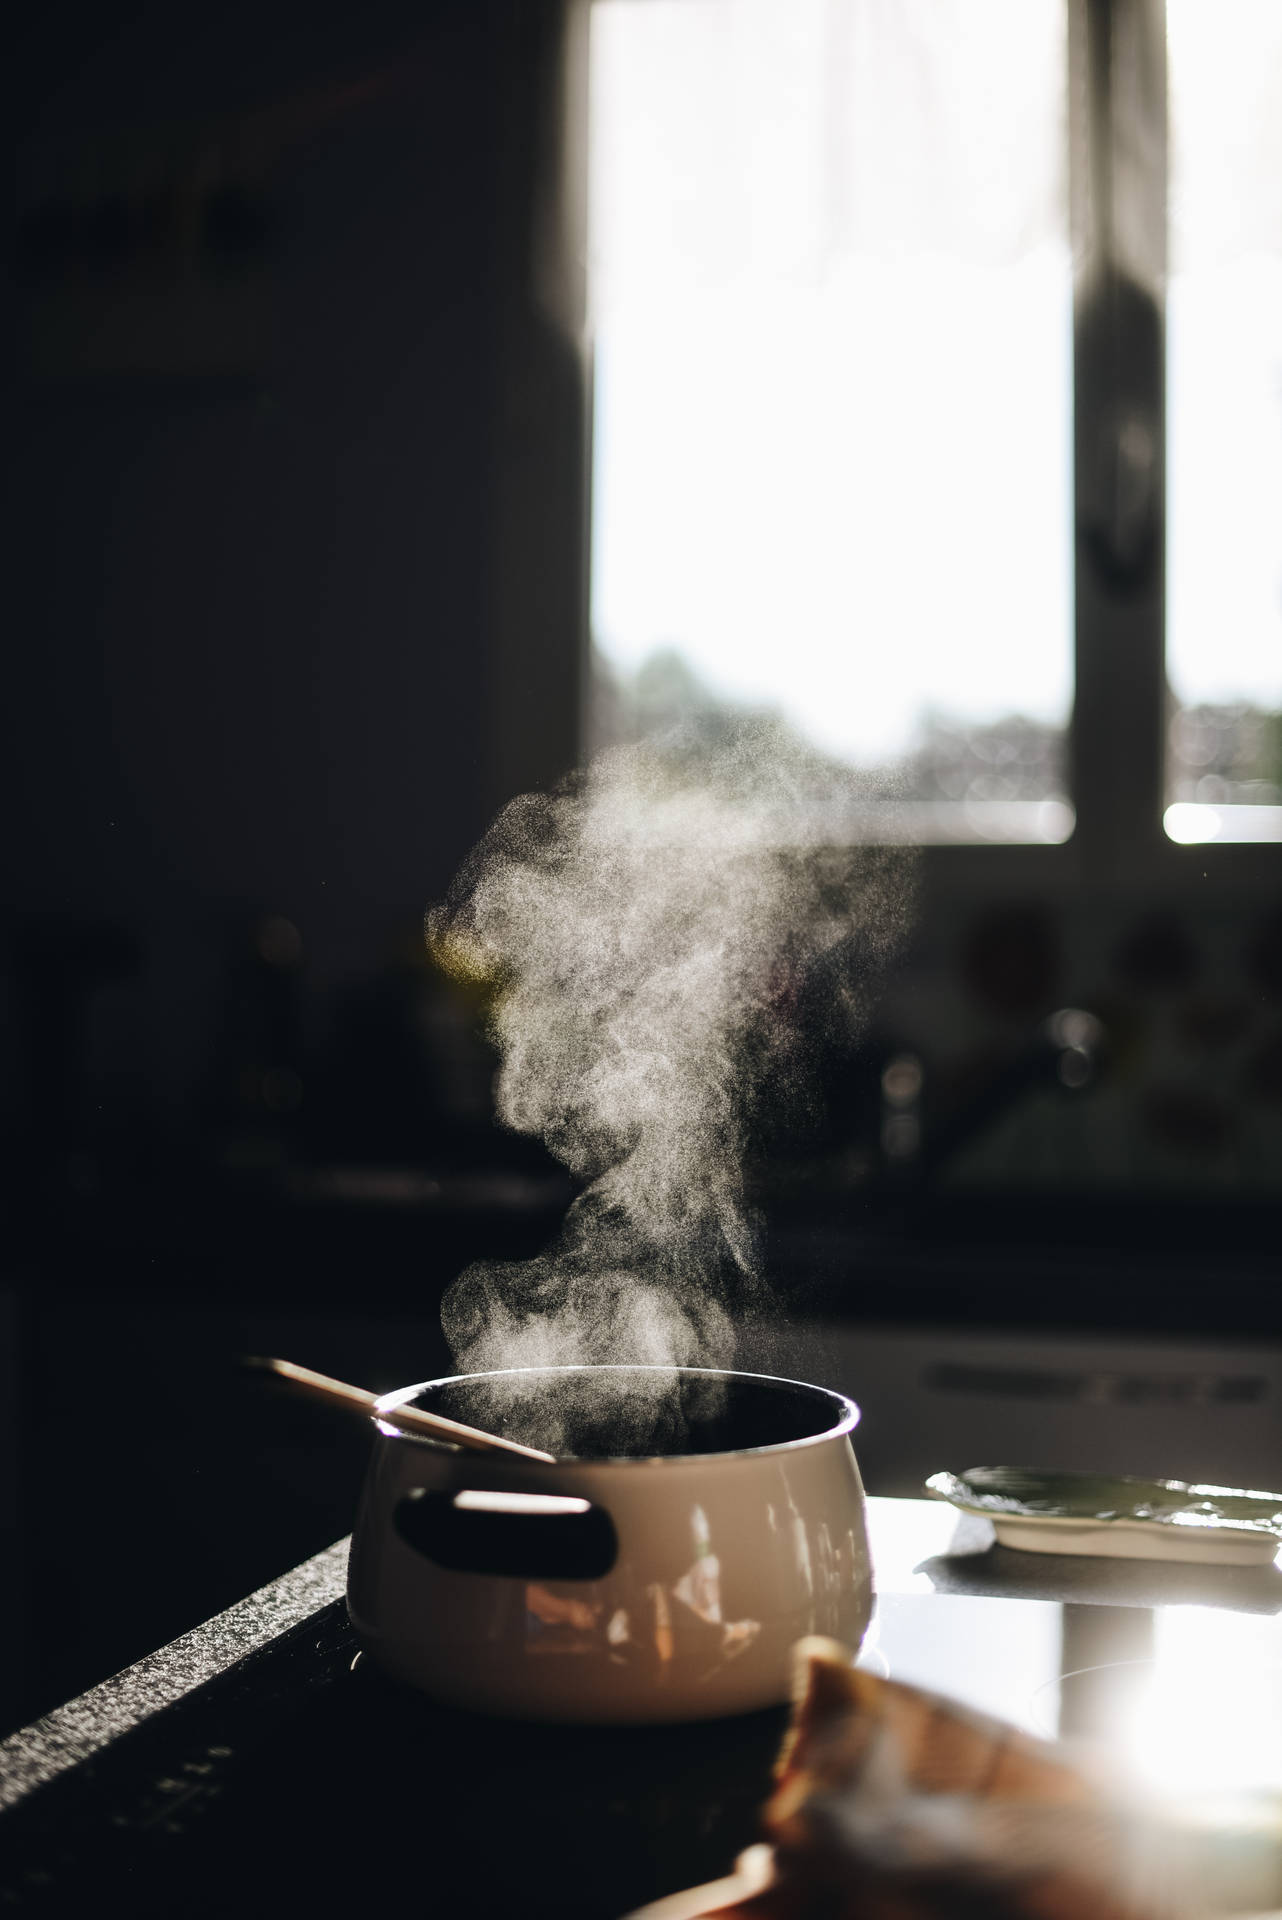 Steam Rises From A Simmering Pot Of Flavorful Concoction. Background